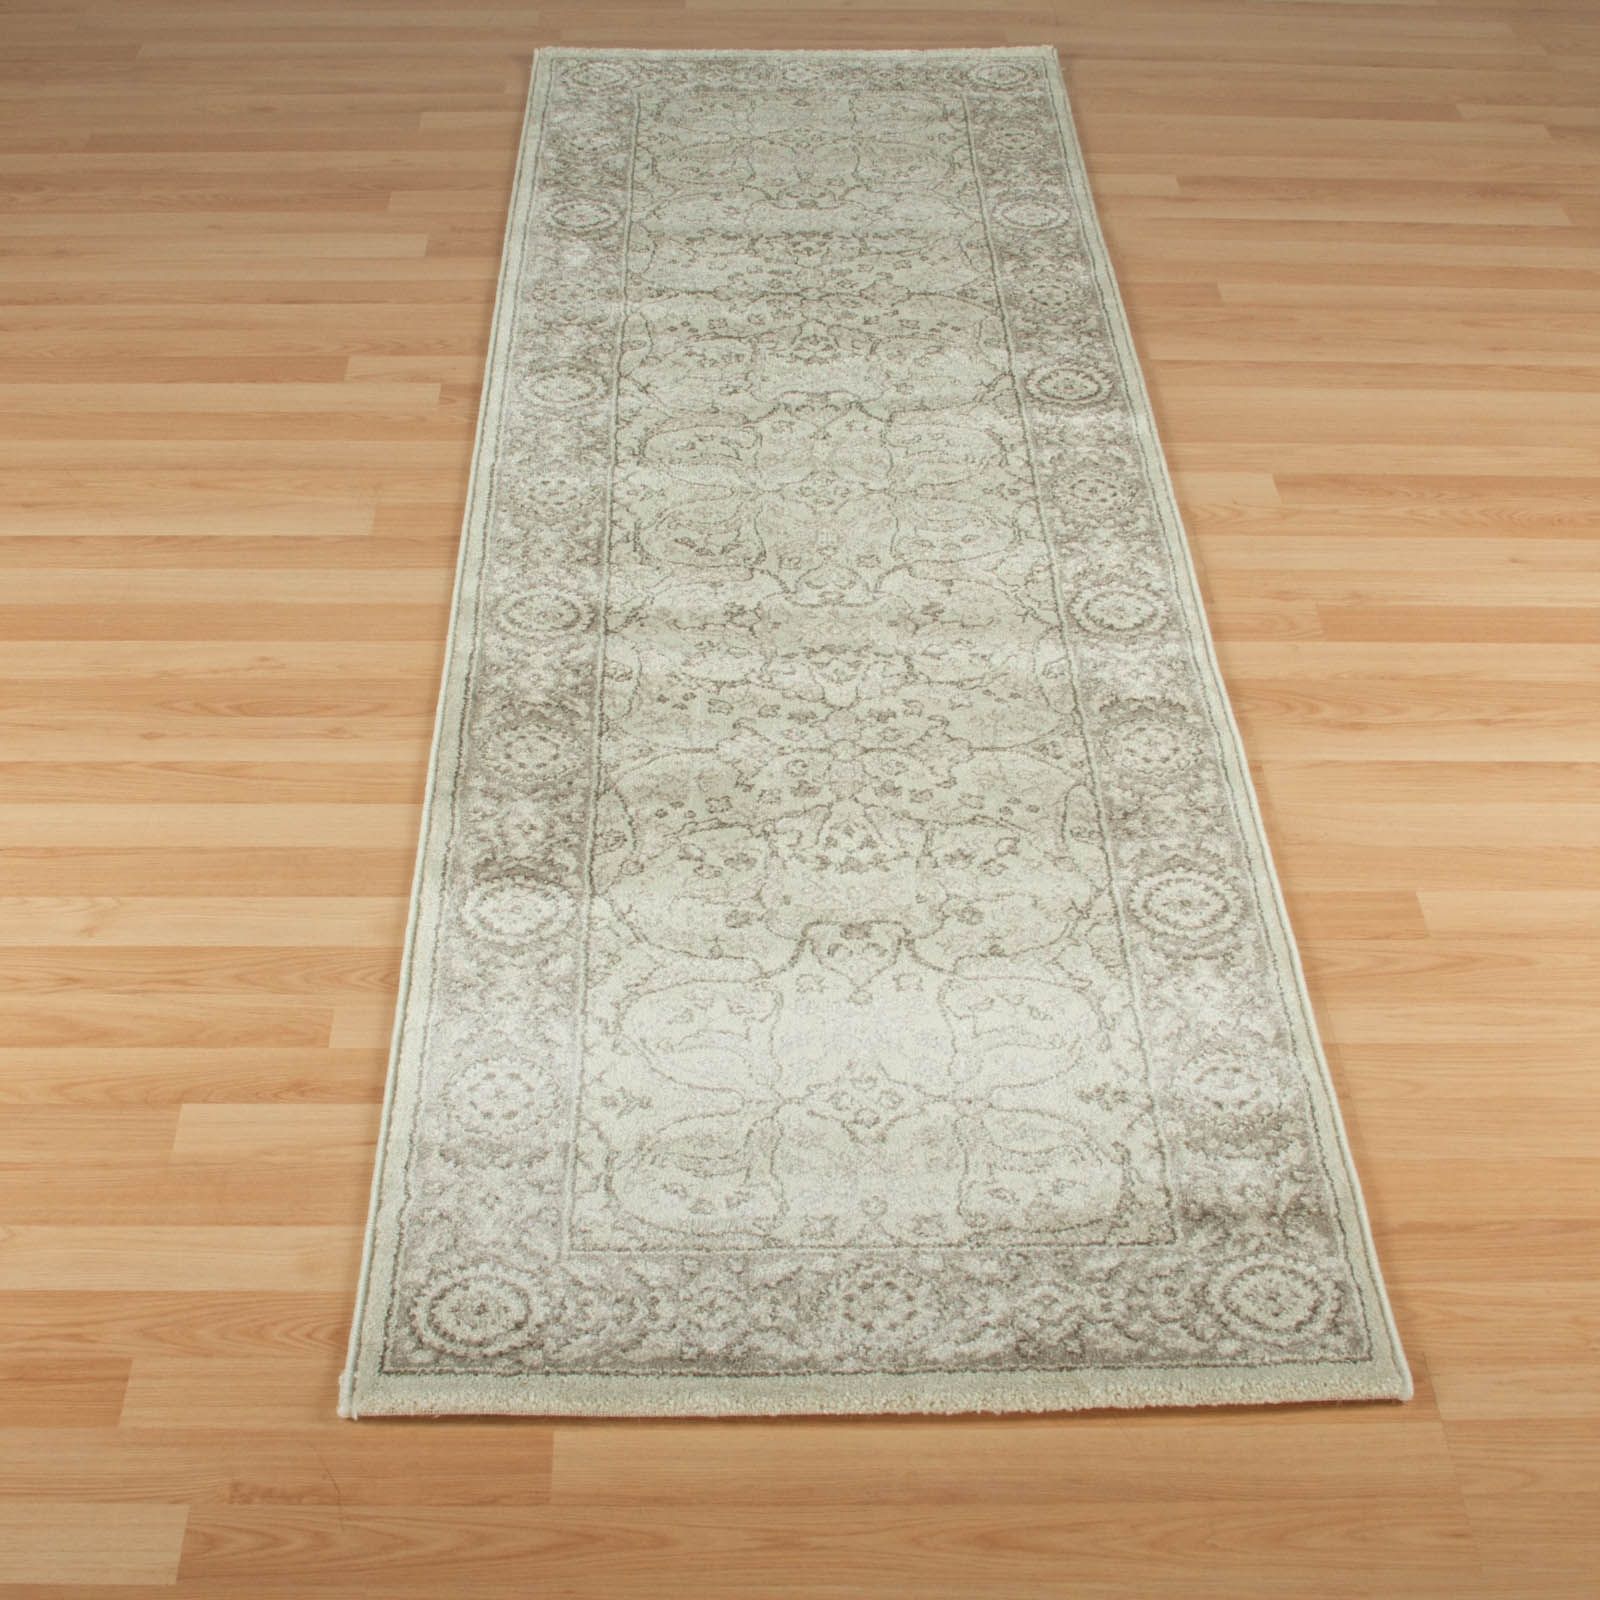 Flooring Lovely Hallway Runners For Floor Decor Idea Throughout Washable Runner Rugs For Hallways (View 3 of 20)